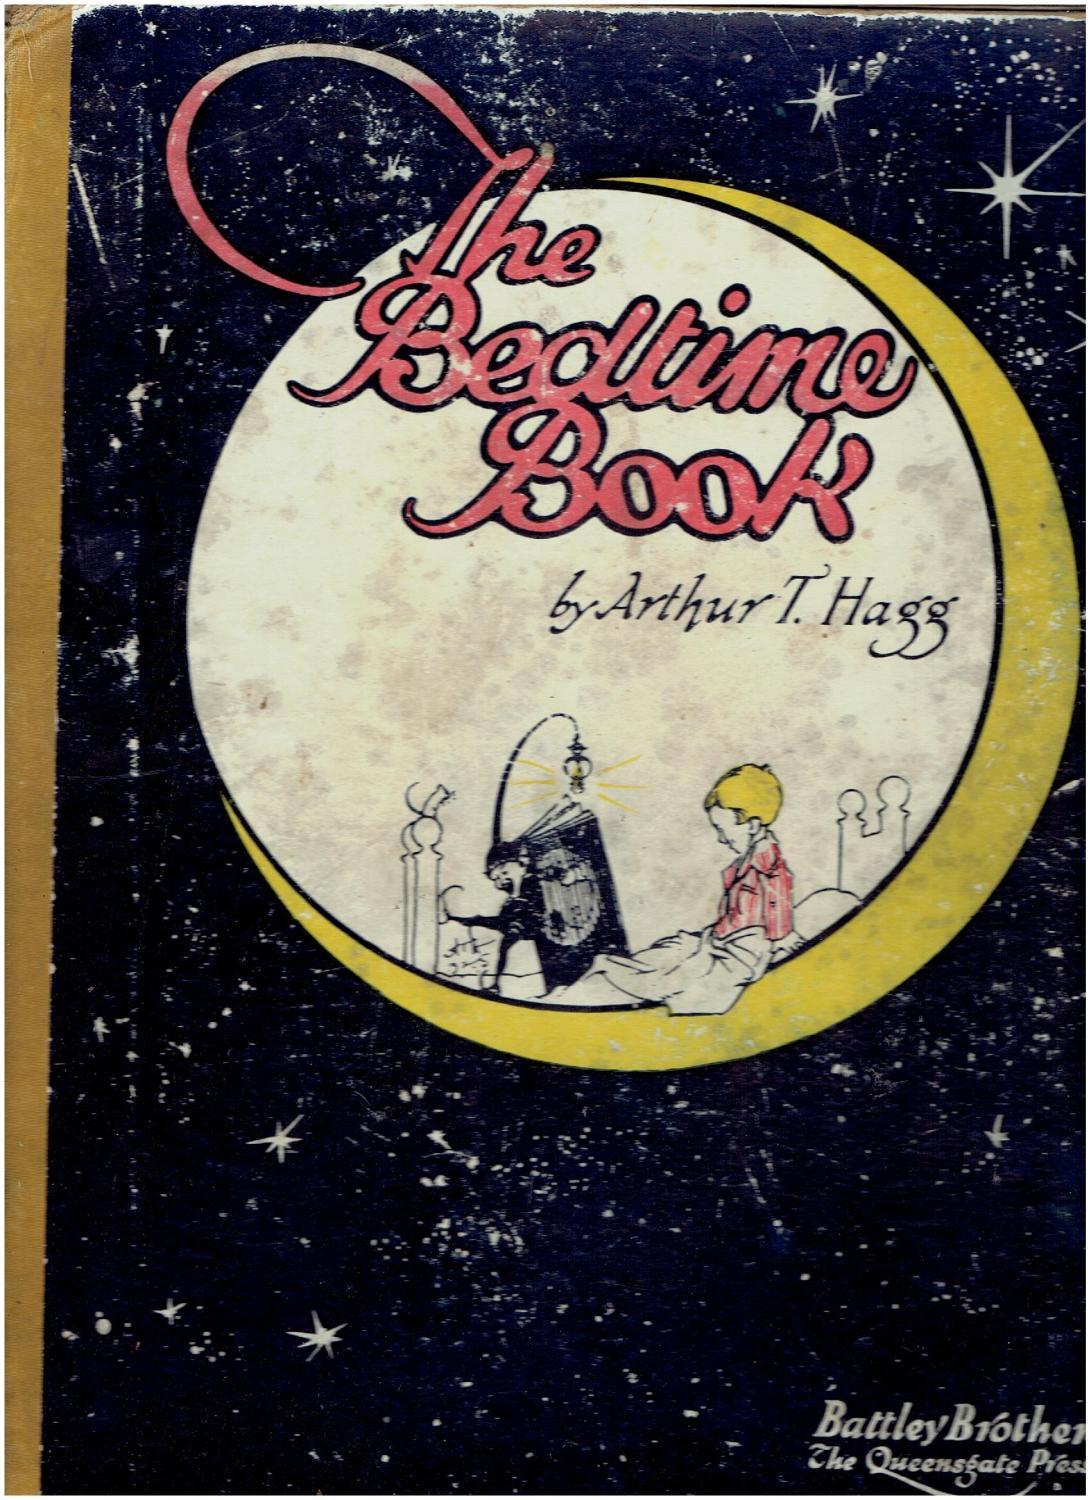 Cover of book by Arthur T Hagg